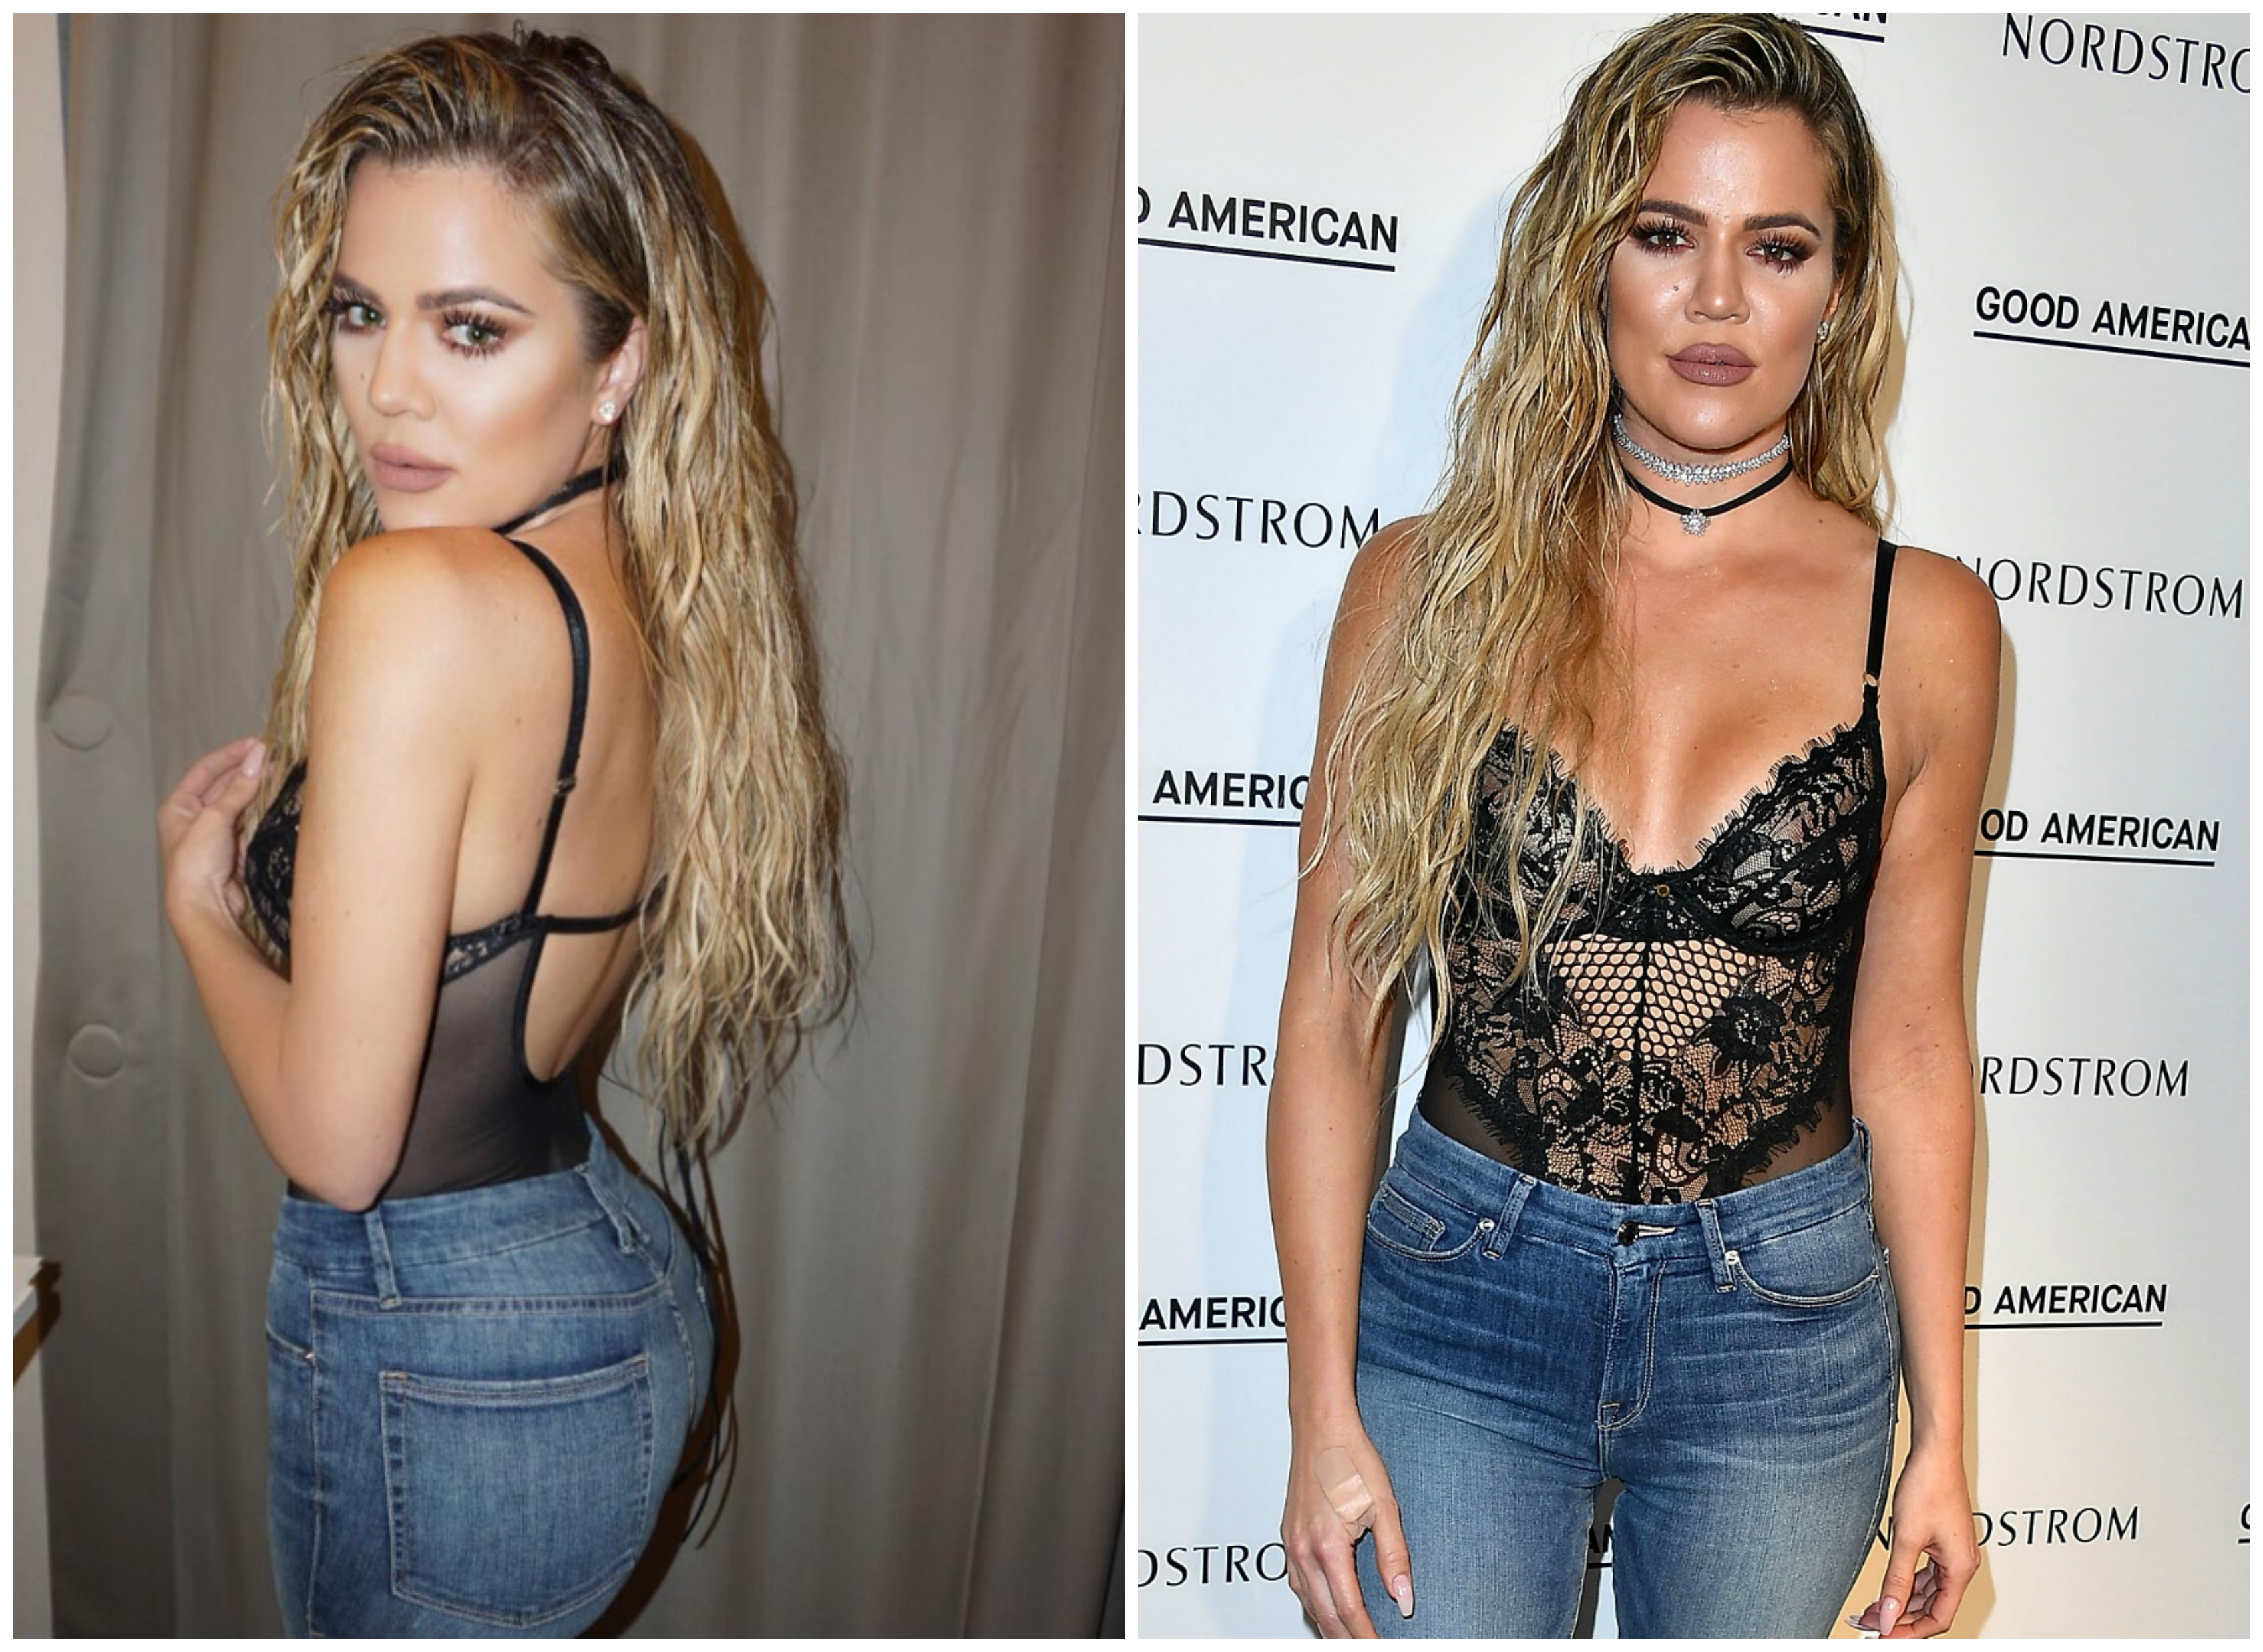 Khloé Kardashian Shares Her Fashion Firsts, from Her Camel Toe